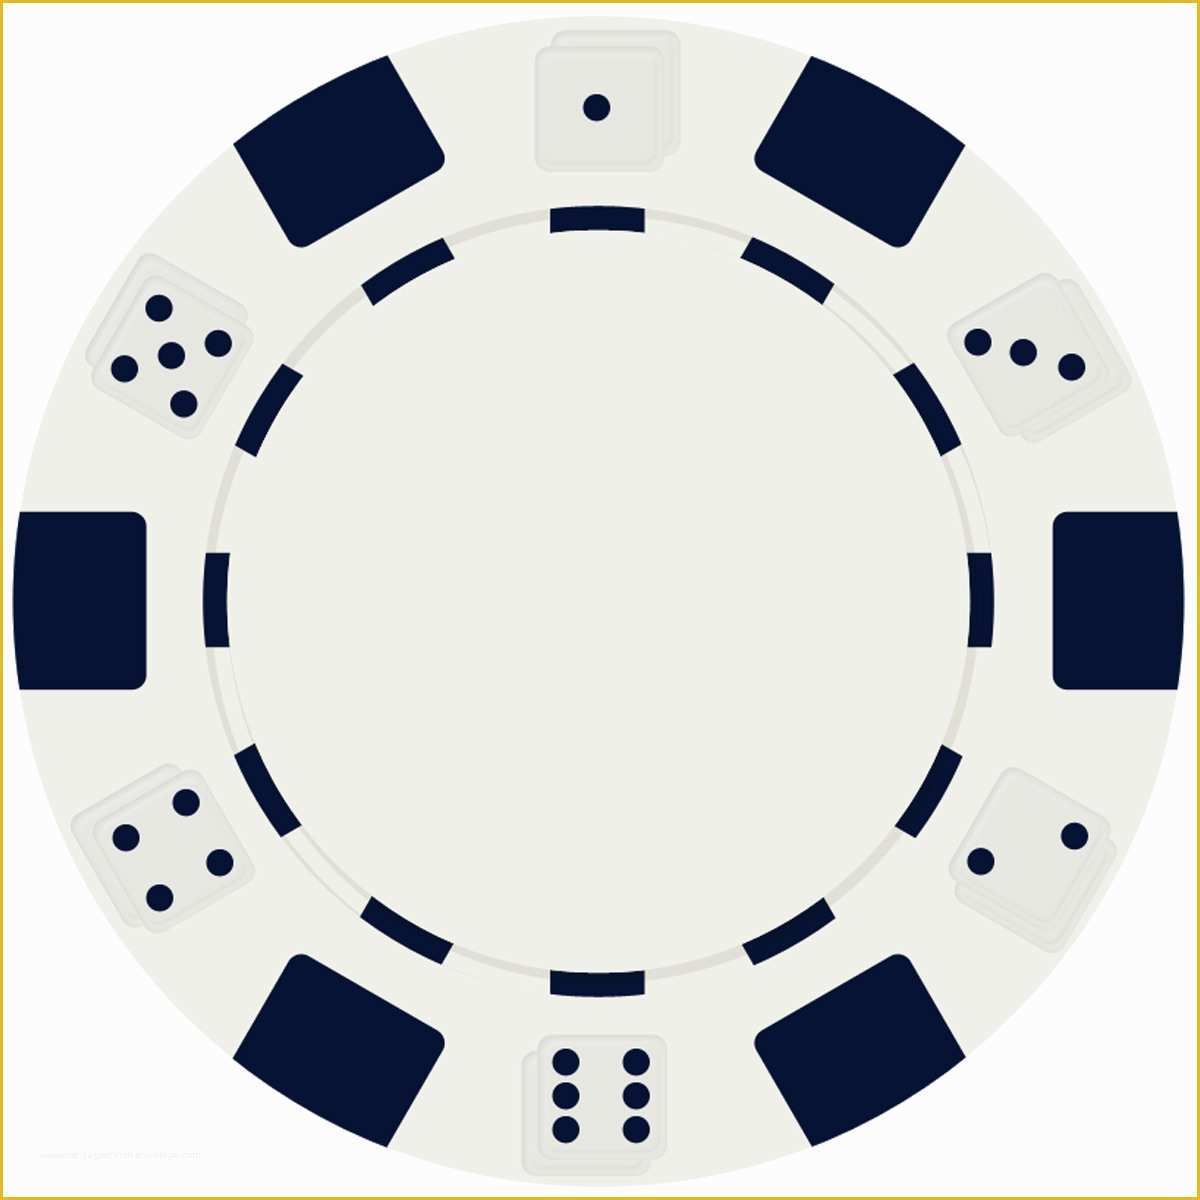 Free Poker Chip Template Of Pcd01 Dice Style Poker Chip – Beyond Manufacturing